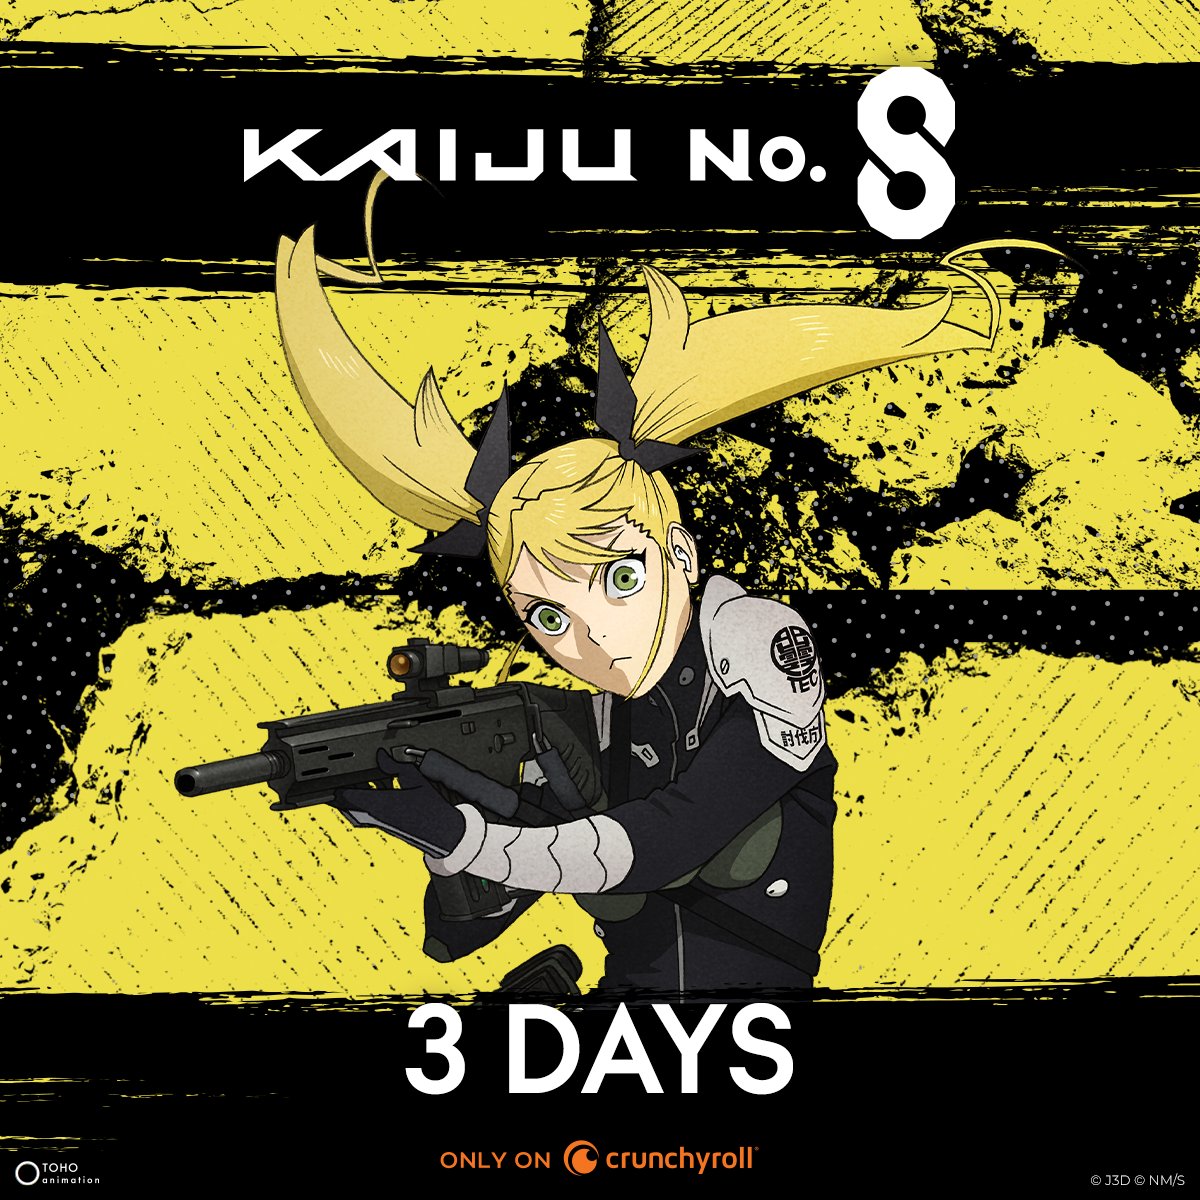 It's almost here! 🔥 Kaiju No.8 is coming in THREE days!